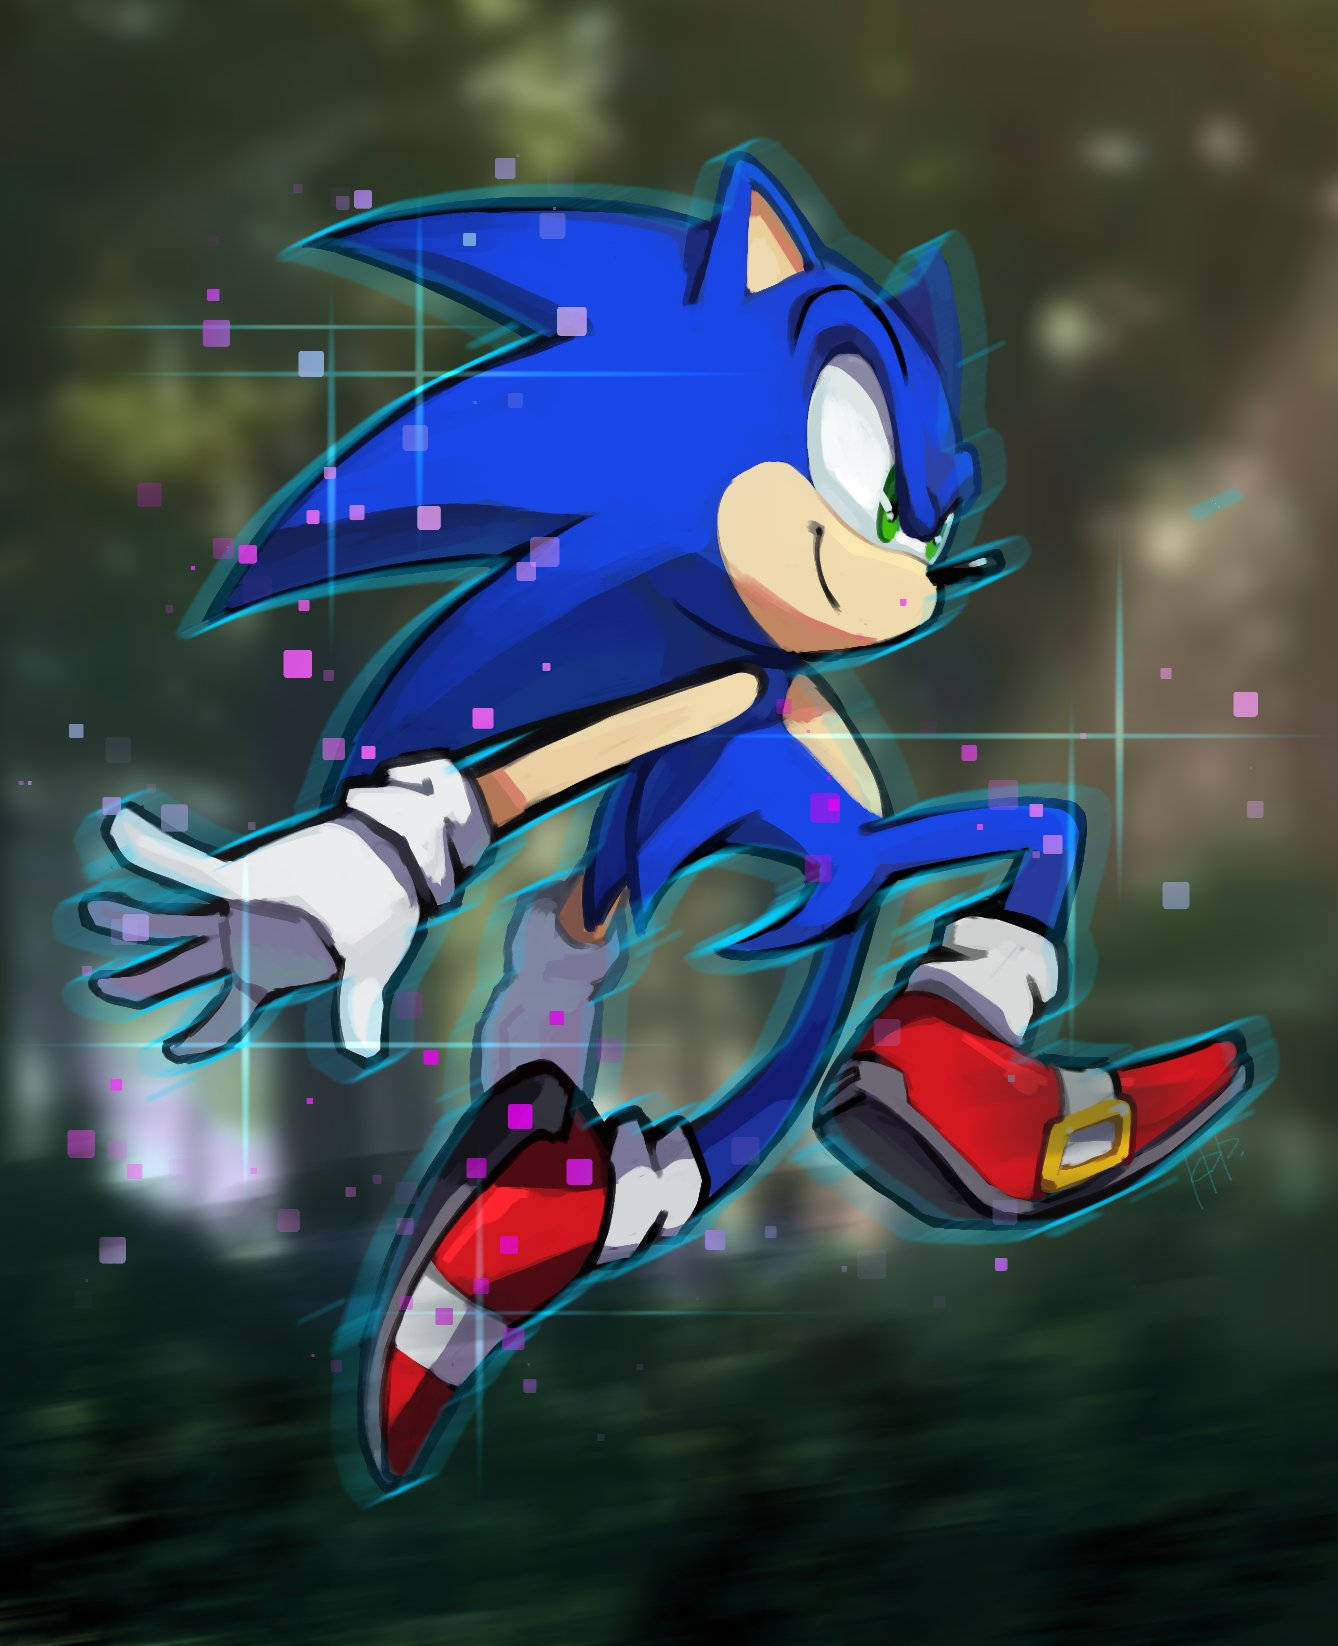 Super Sonic is about to take flight Wallpaper